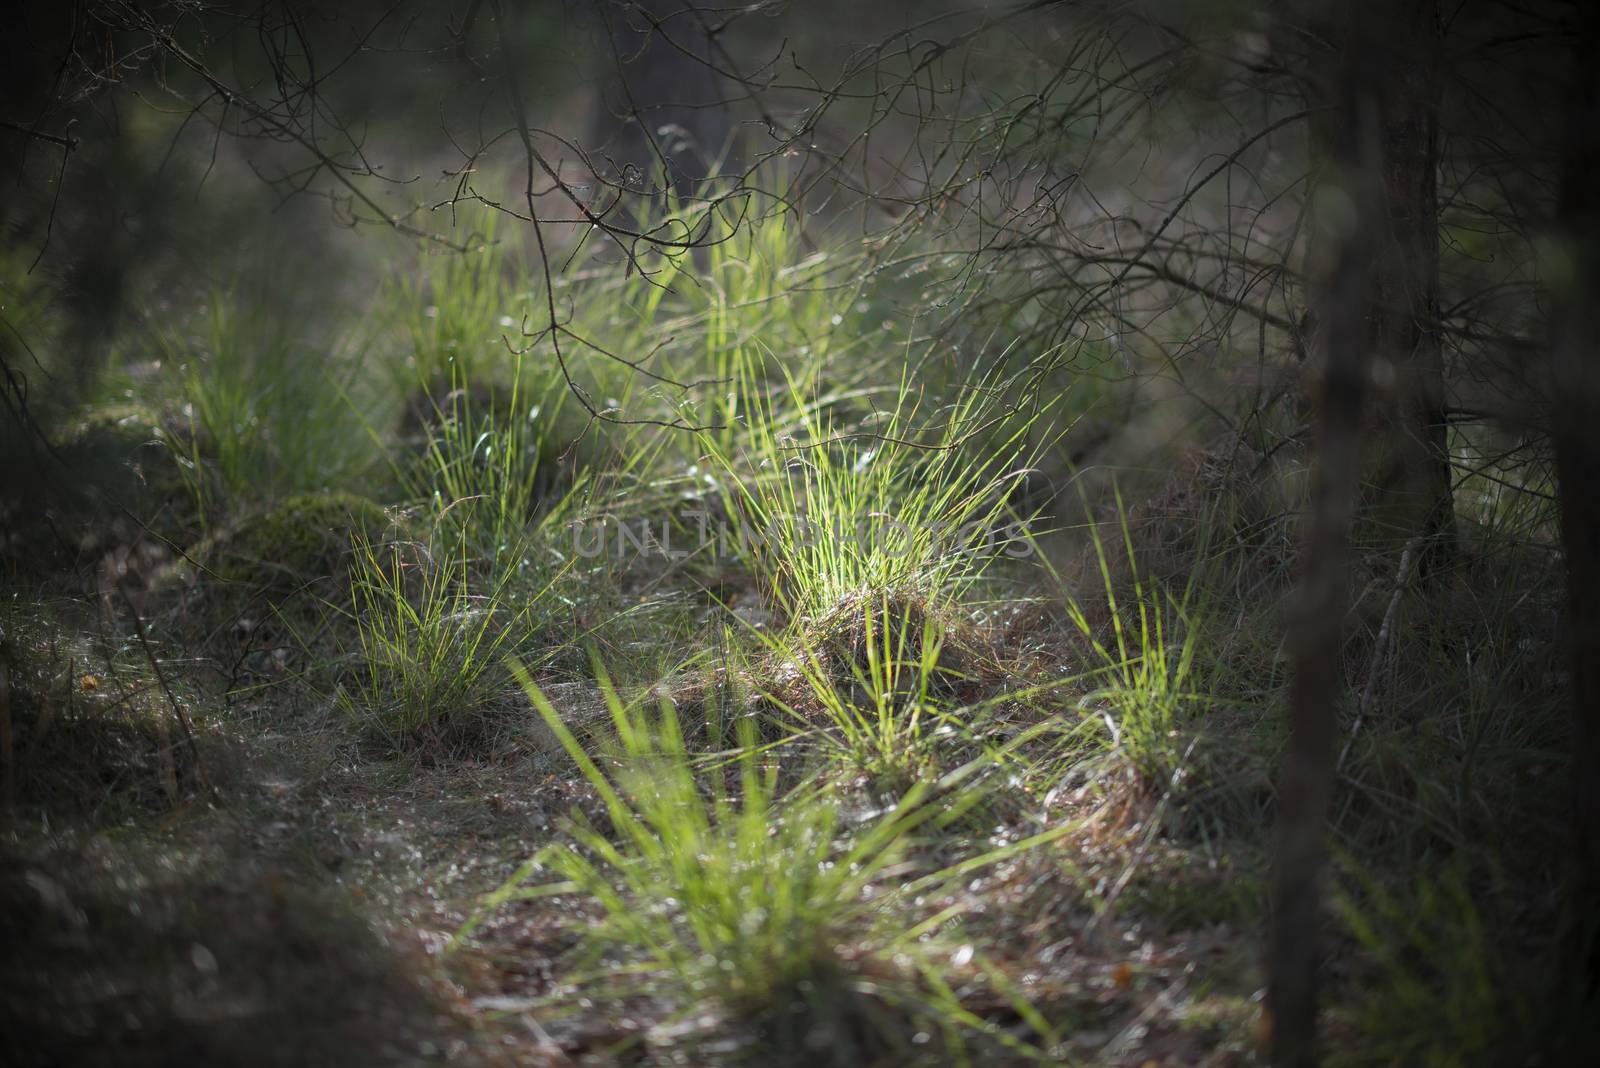 Floodlit grass in a forest
 by Tofotografie